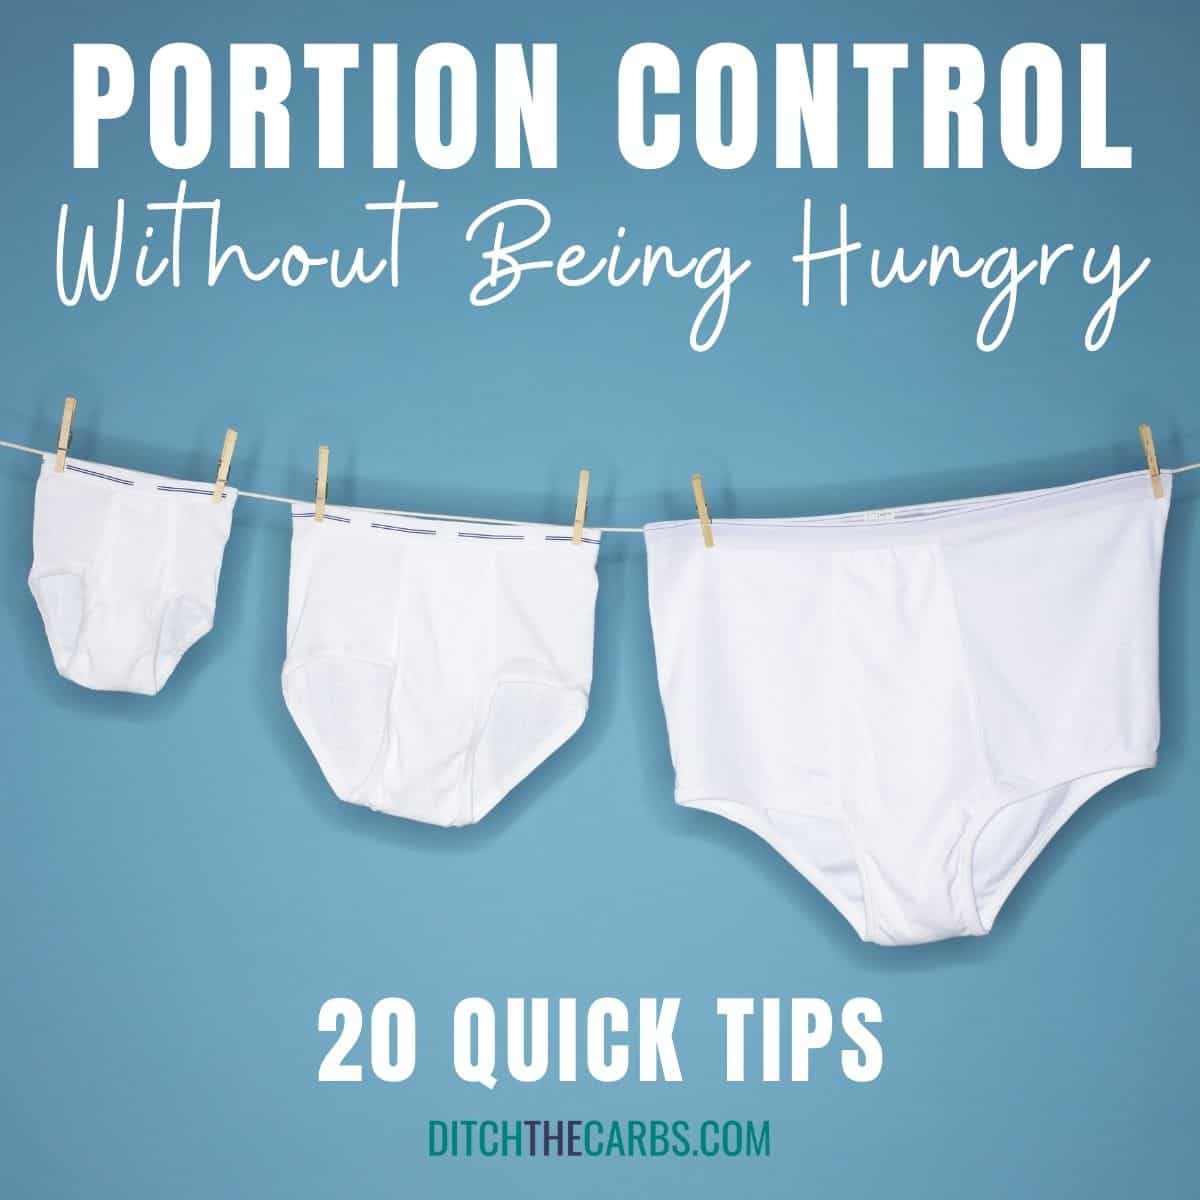 https://thinlicious.com/wp-content/uploads/2019/04/Portion-Control-For-Weight-Loss-Without-Being-Hungry-1200x1800-1200-x-1200-px-1.jpg